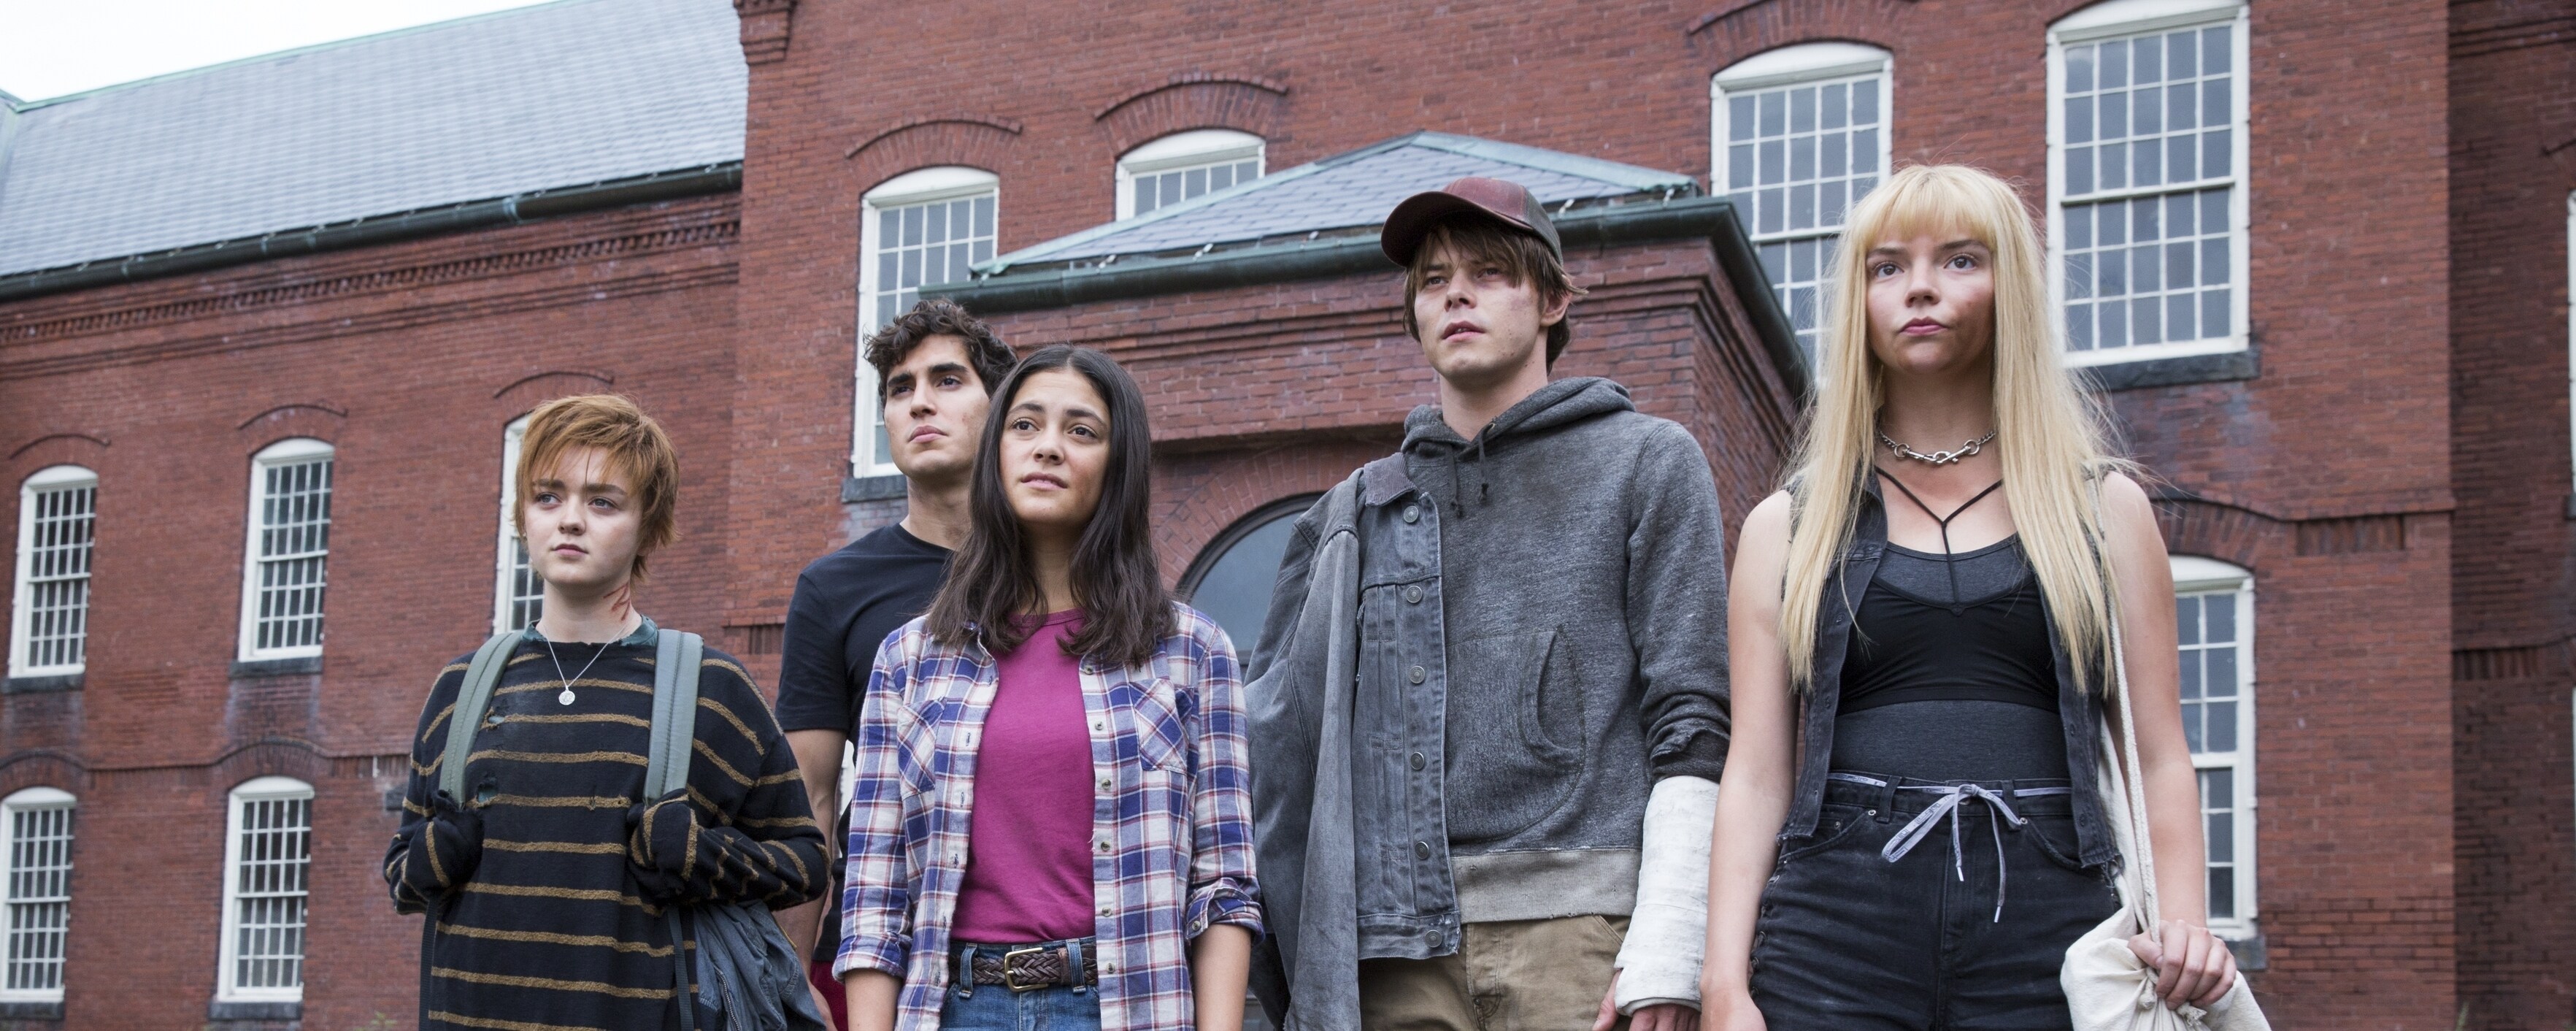 4 Reasons To Get Excited for Marvel's The New Mutants